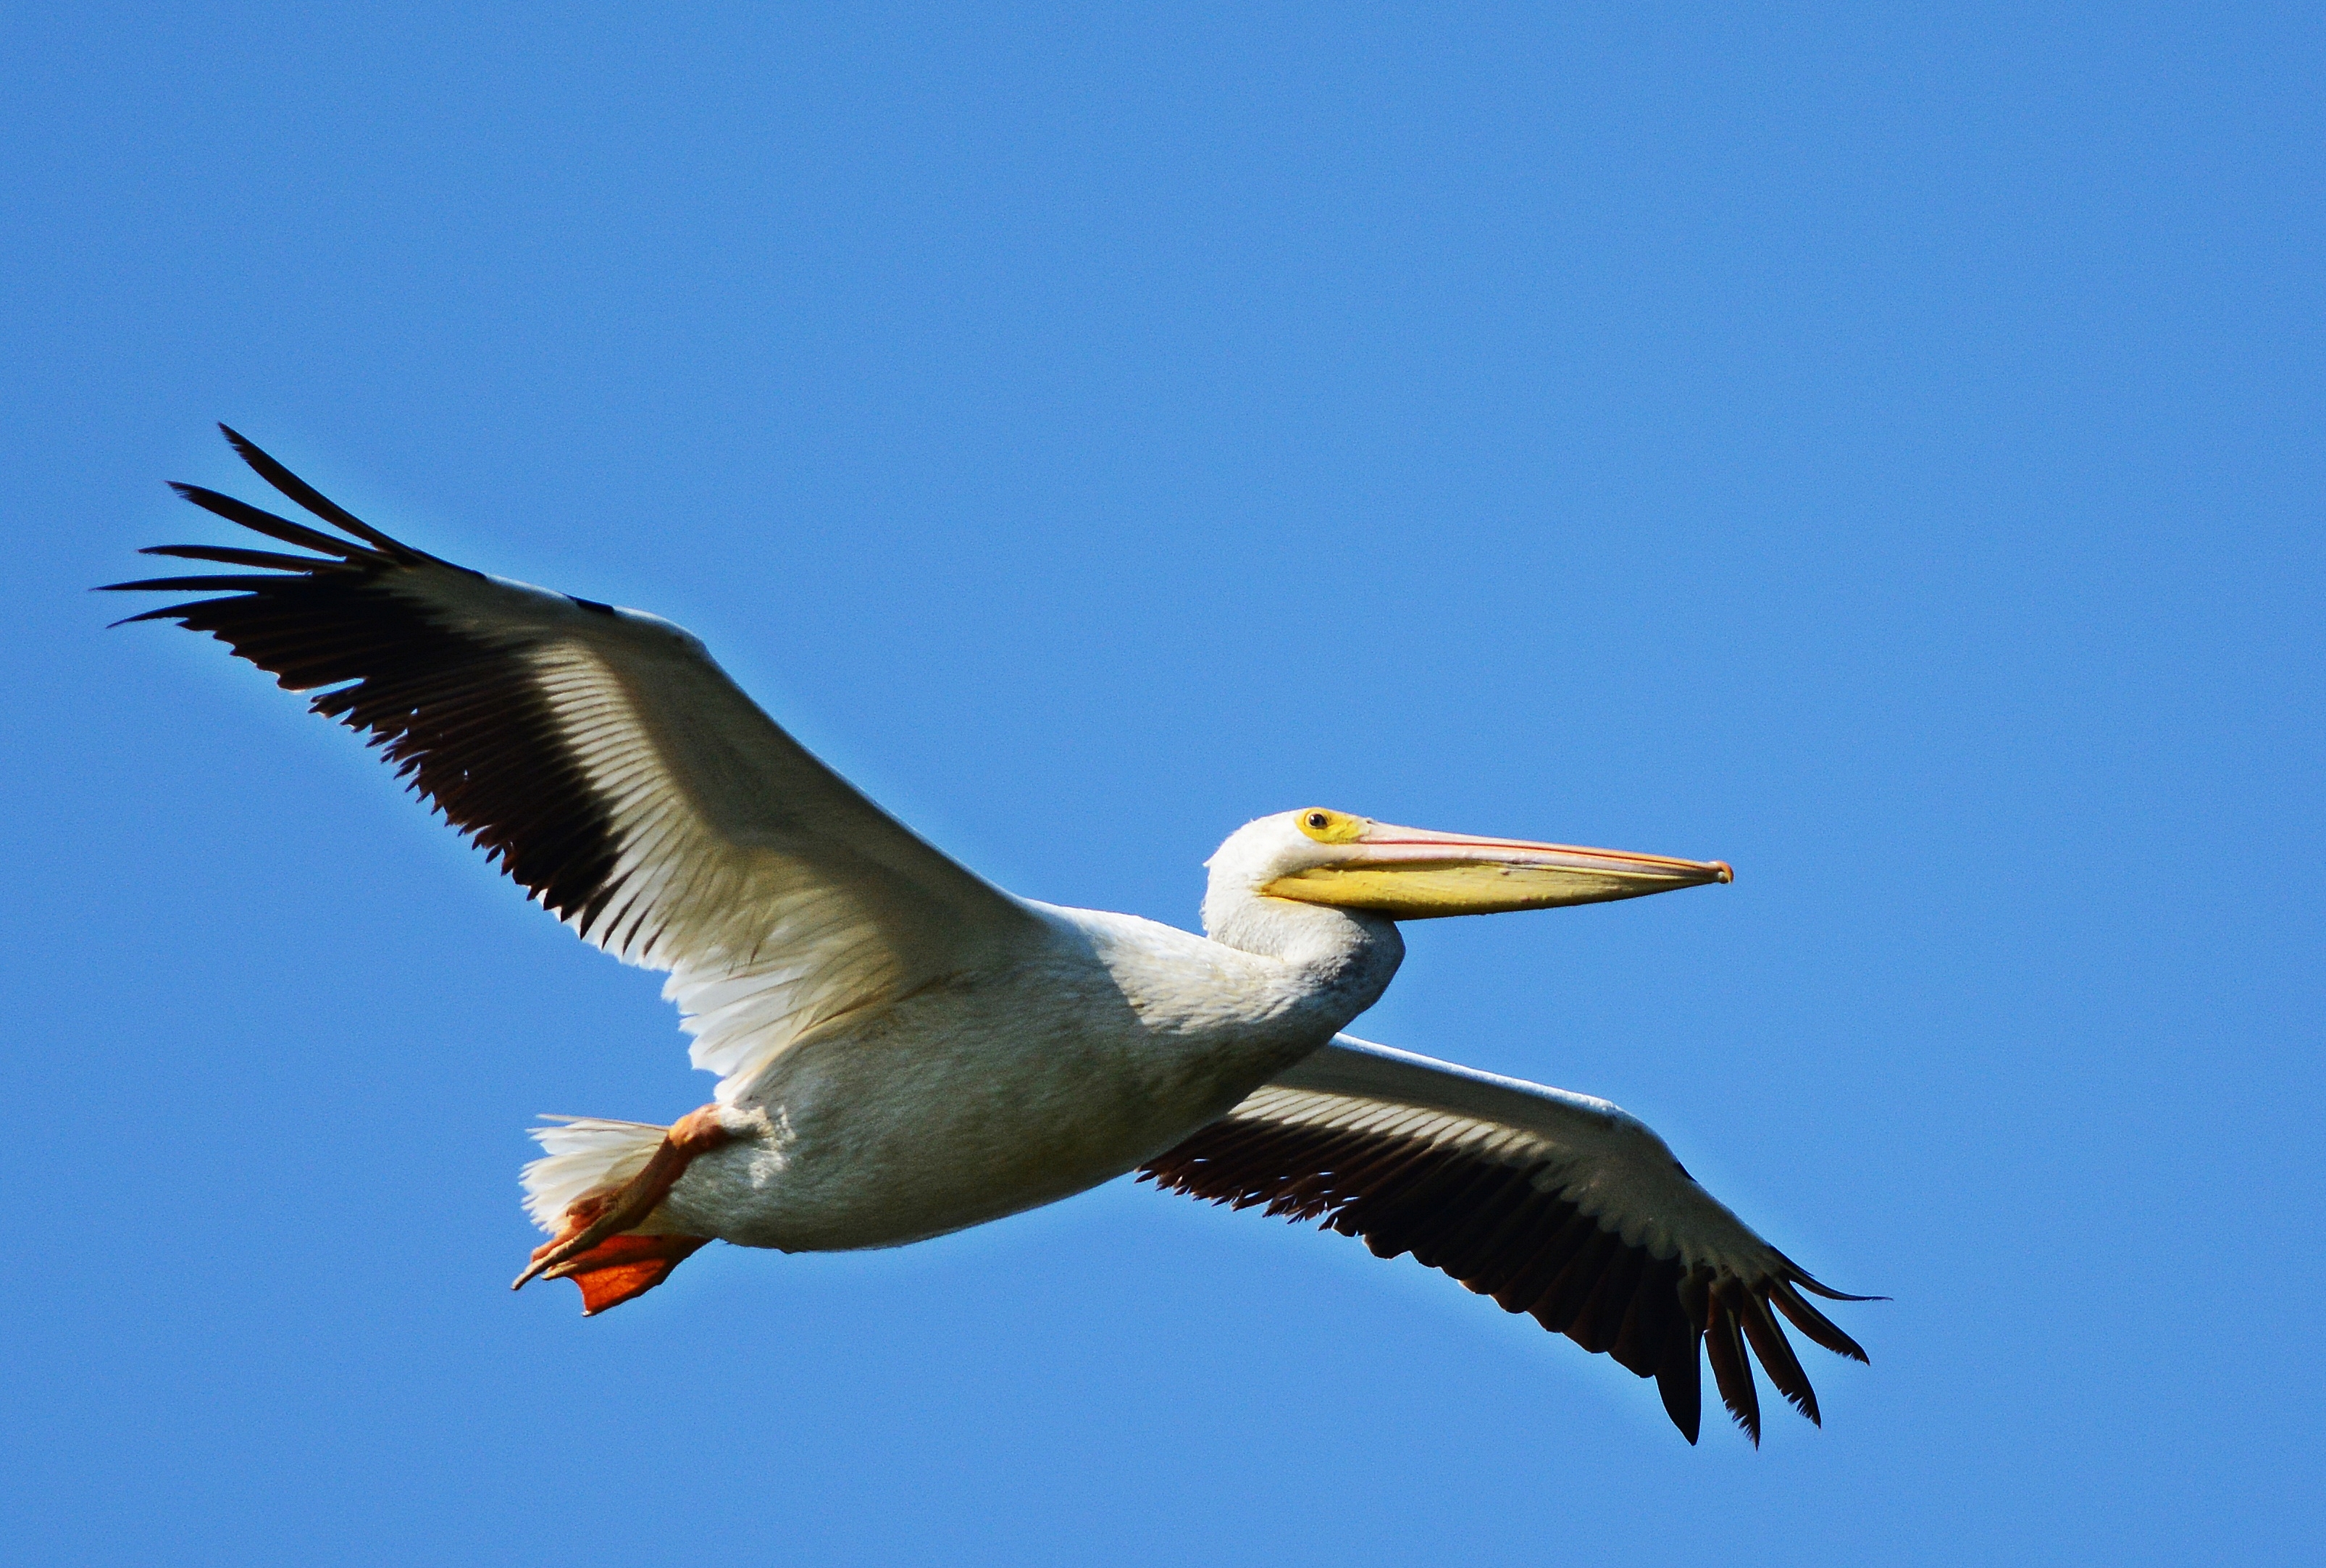 White pelicans in the sky – Skywatch Friday | Dina's Wildlife Adventures